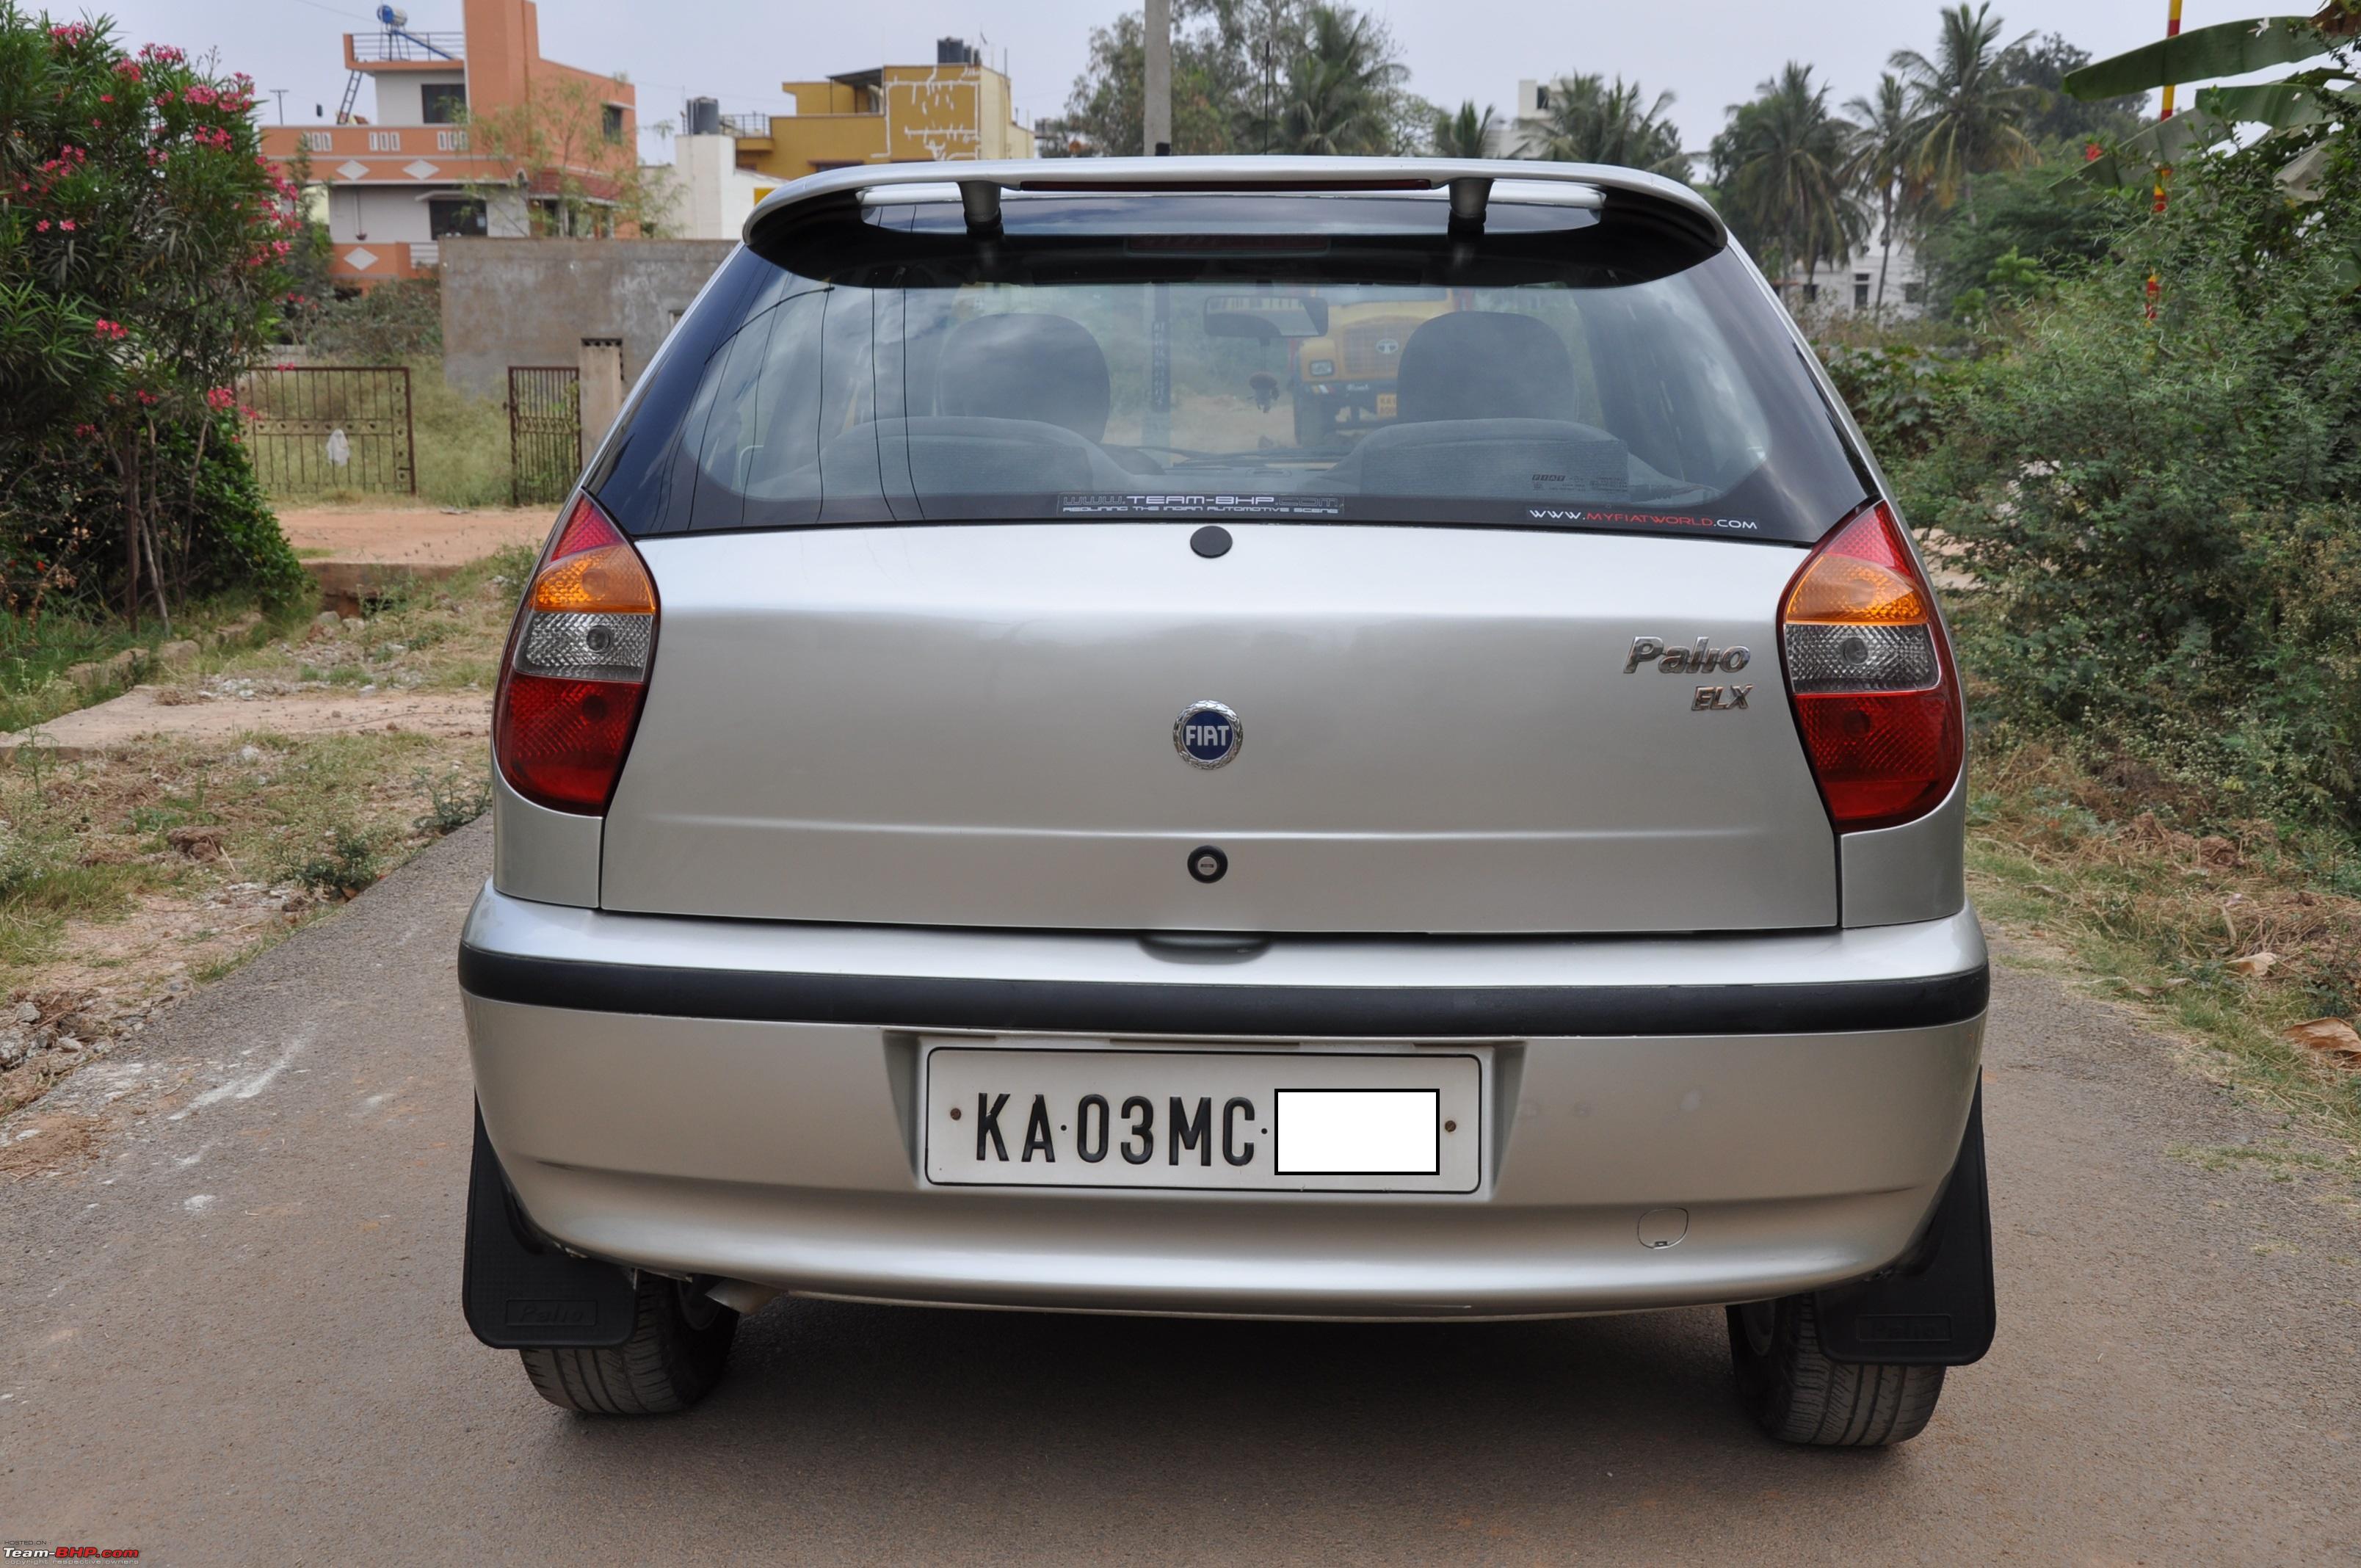 Fiat Palio 1.2 NV Ownership Report. Update 10 years